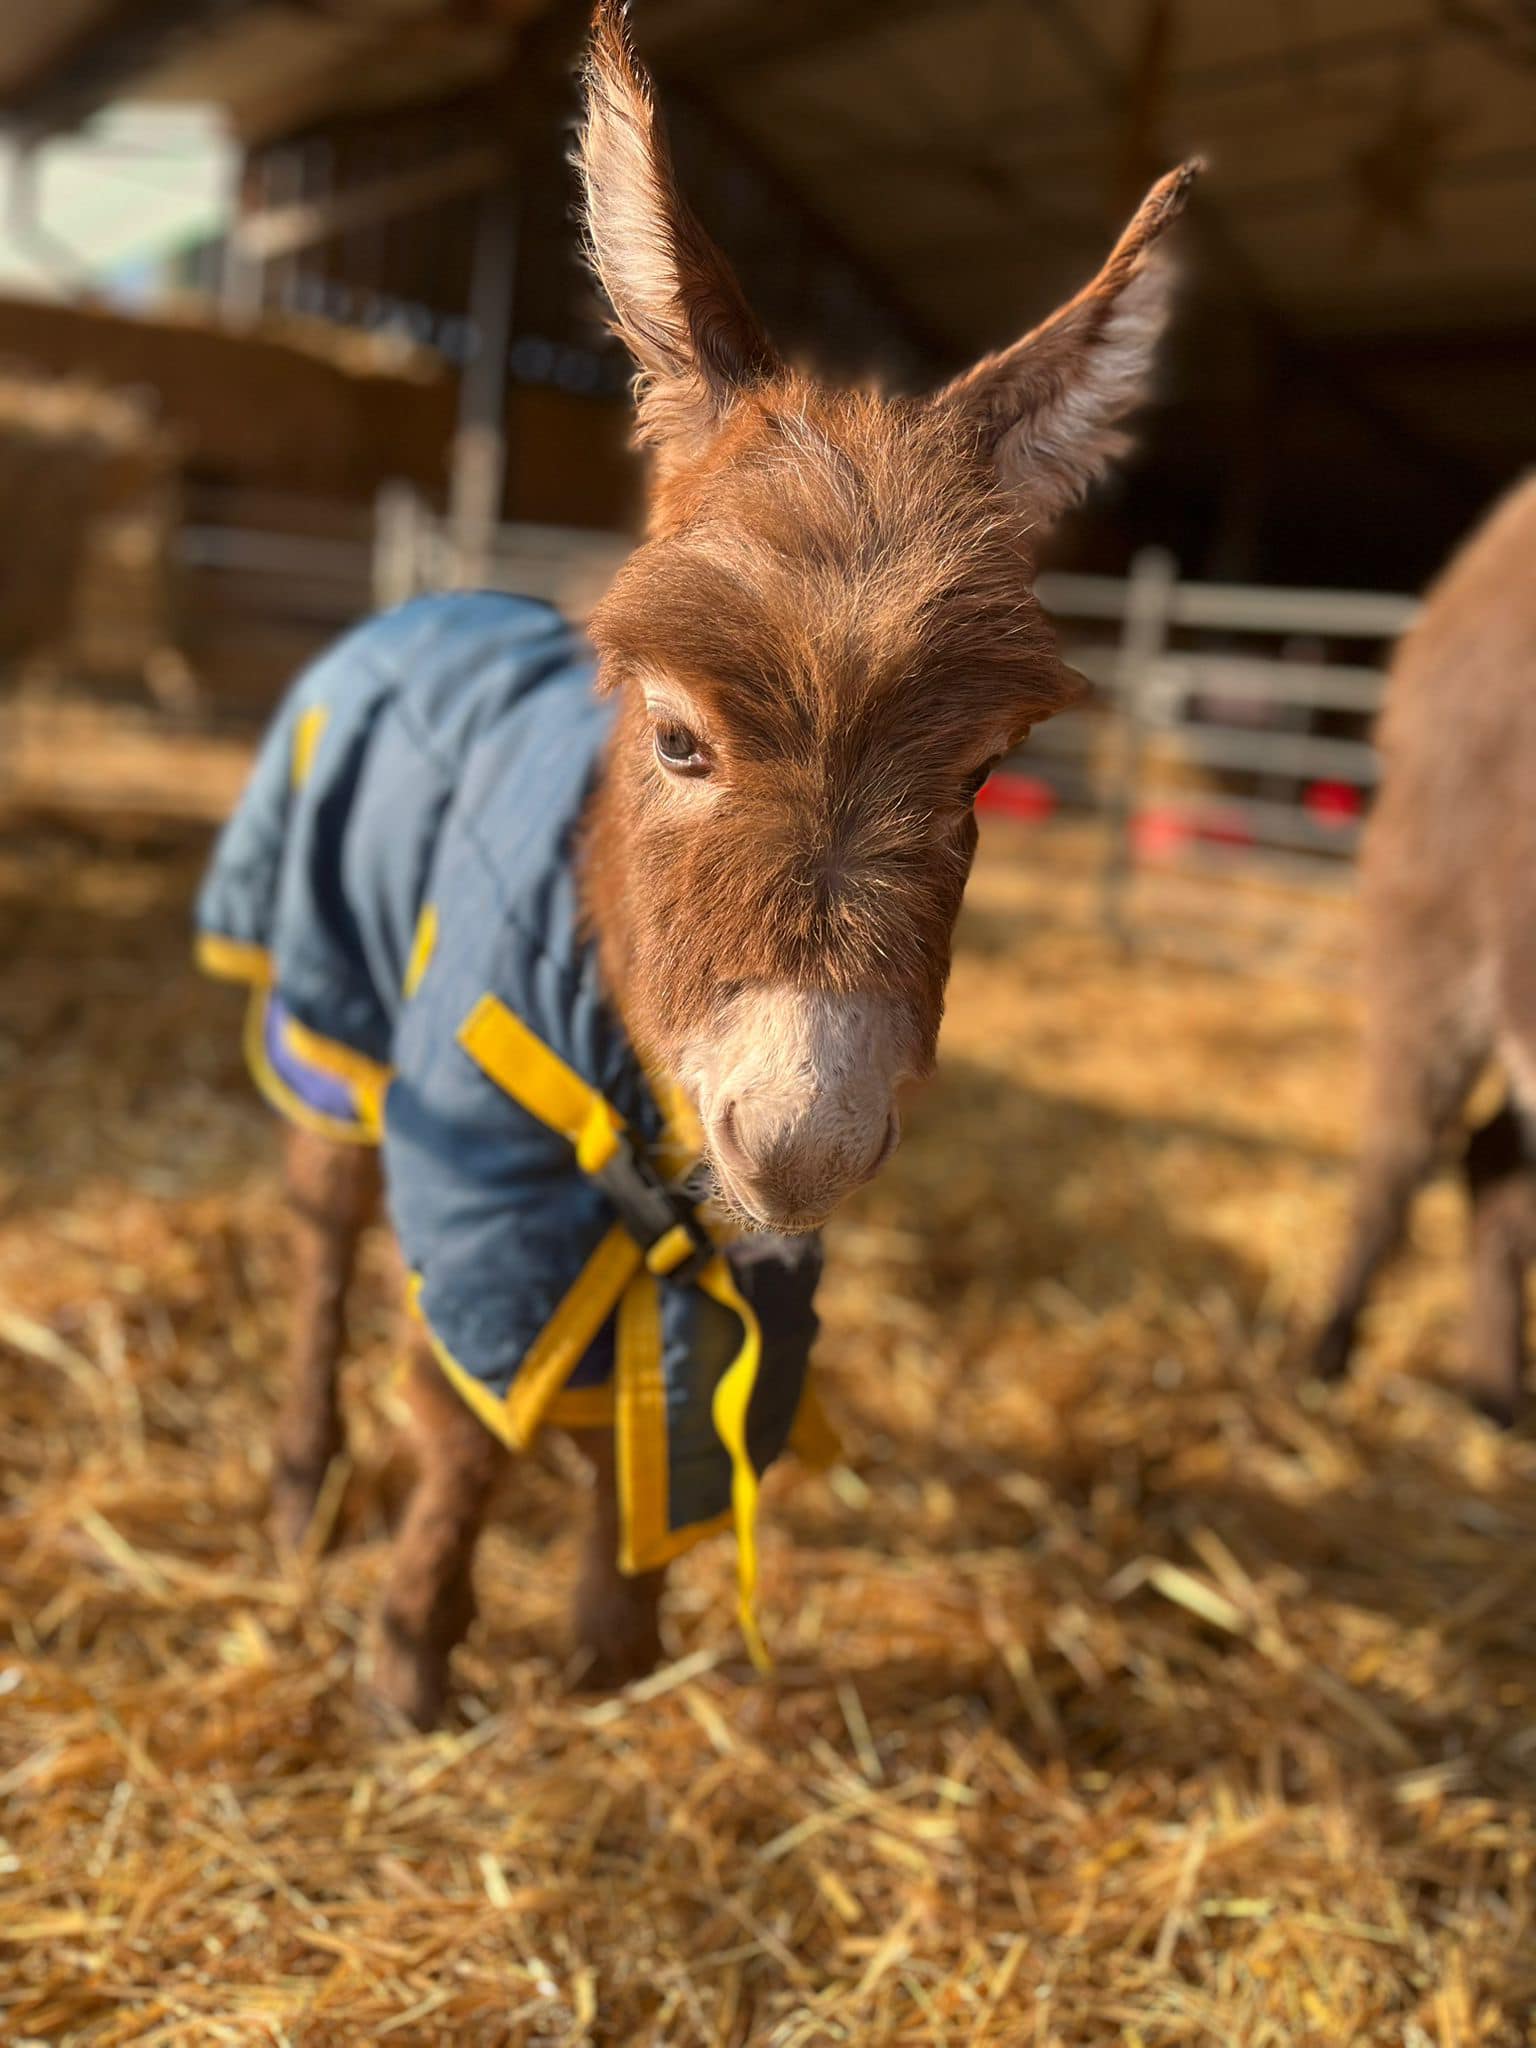 Baby donkey Moon has been safely returned to her mother and her owners at Miller's Ark Animals